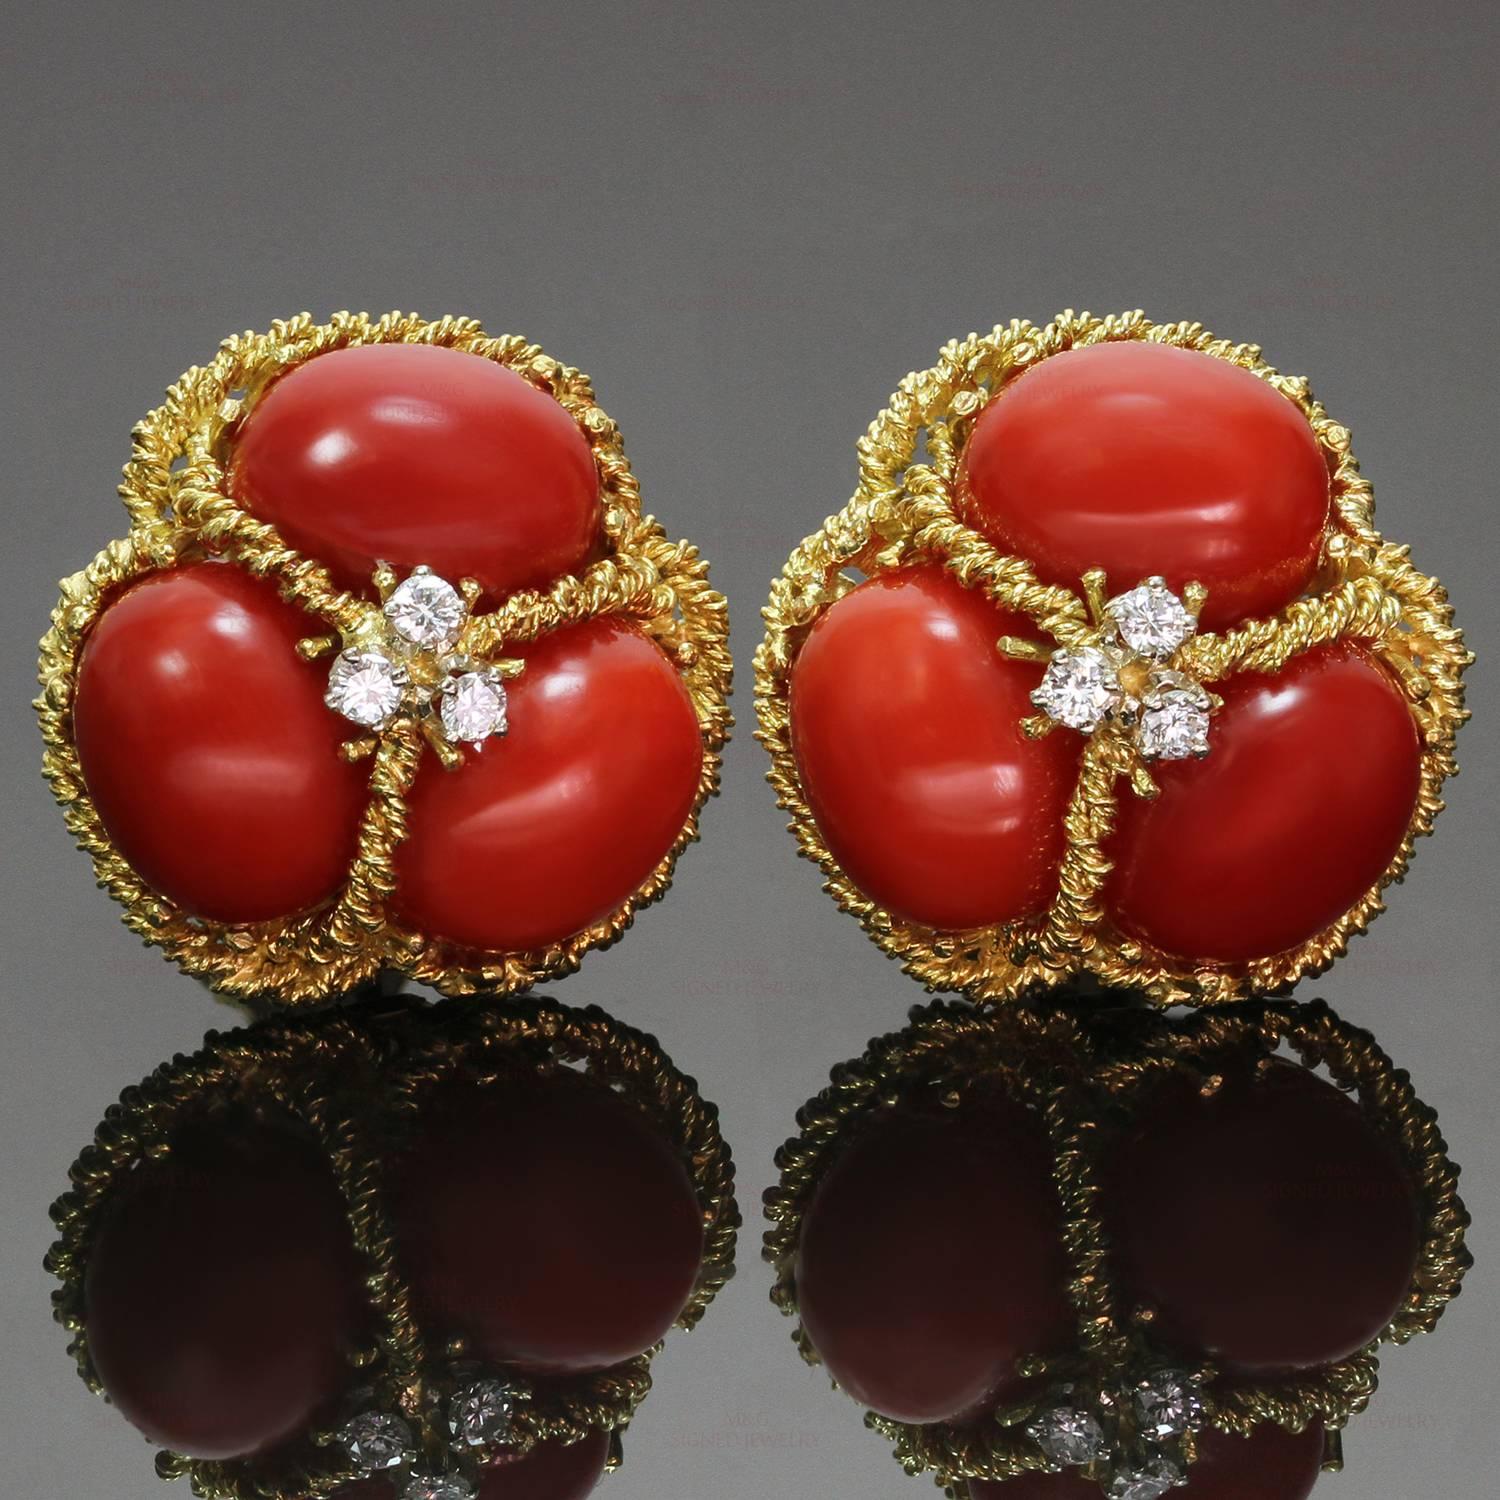 These gorgeous lever-back earrings feature an elegant rope-texture design crafted in 18k yellow gold and set with 6 natural oval cabochon oxblood corals each measuring about 11.90mm by 9.95mm and accented with 6 brilliant-cut round diamonds weighing